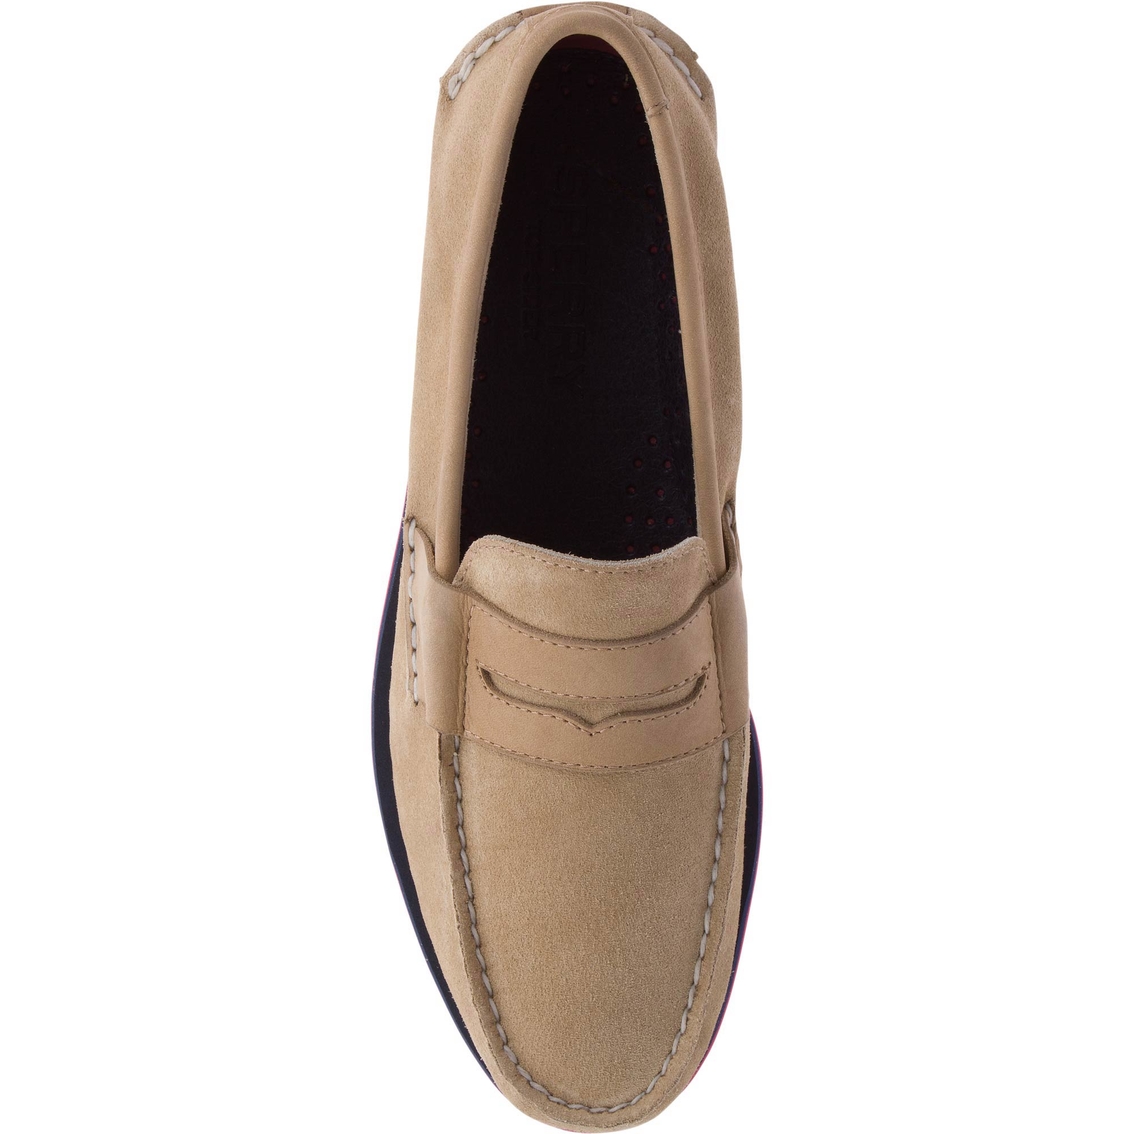 Sperry AO Penny Nautical Tan Loafers - Image 3 of 4